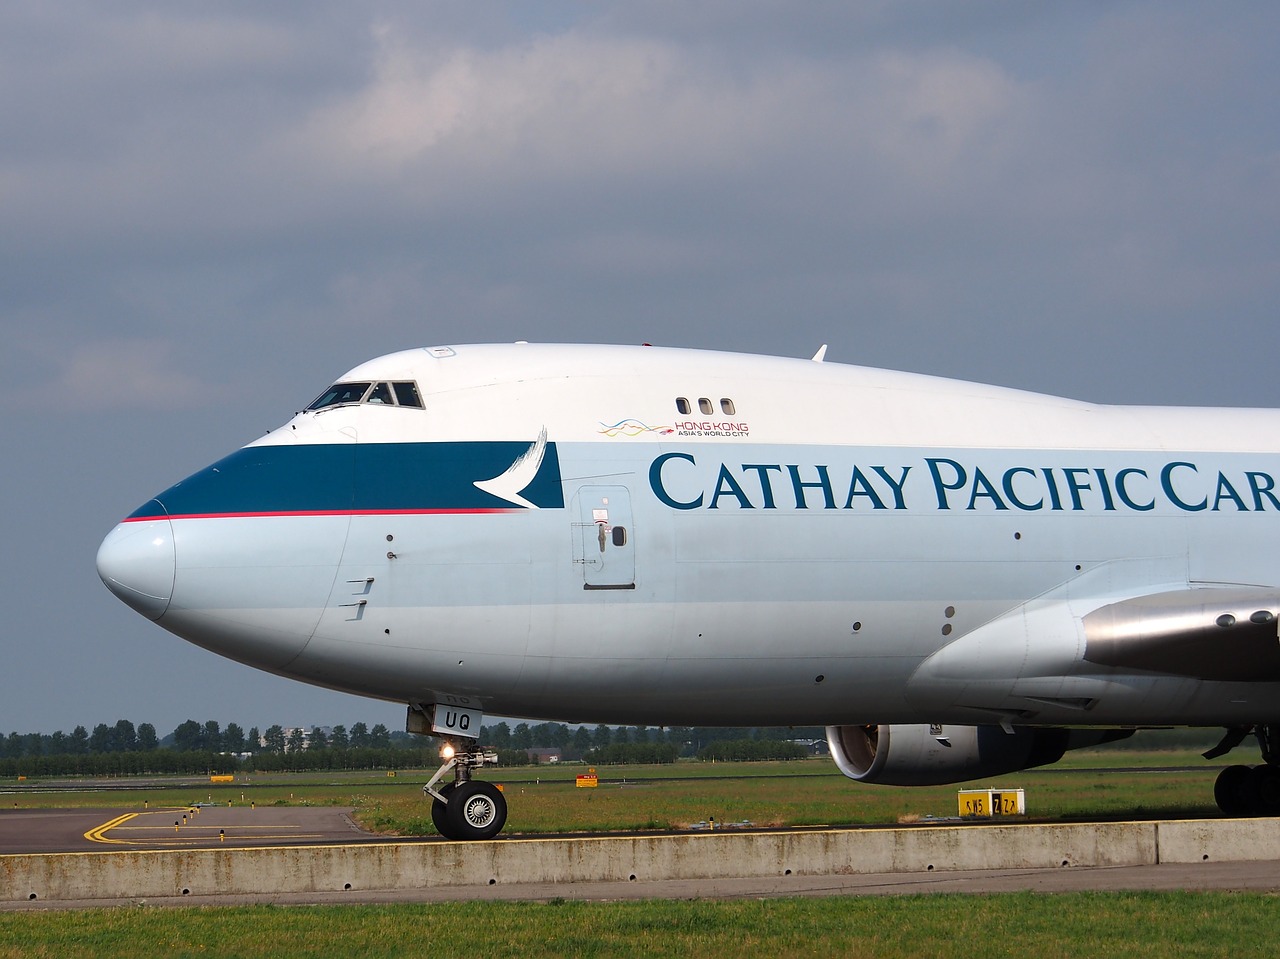 Cathay Pacific asks staff to take unpaid leave amidst coronavirus outbreak